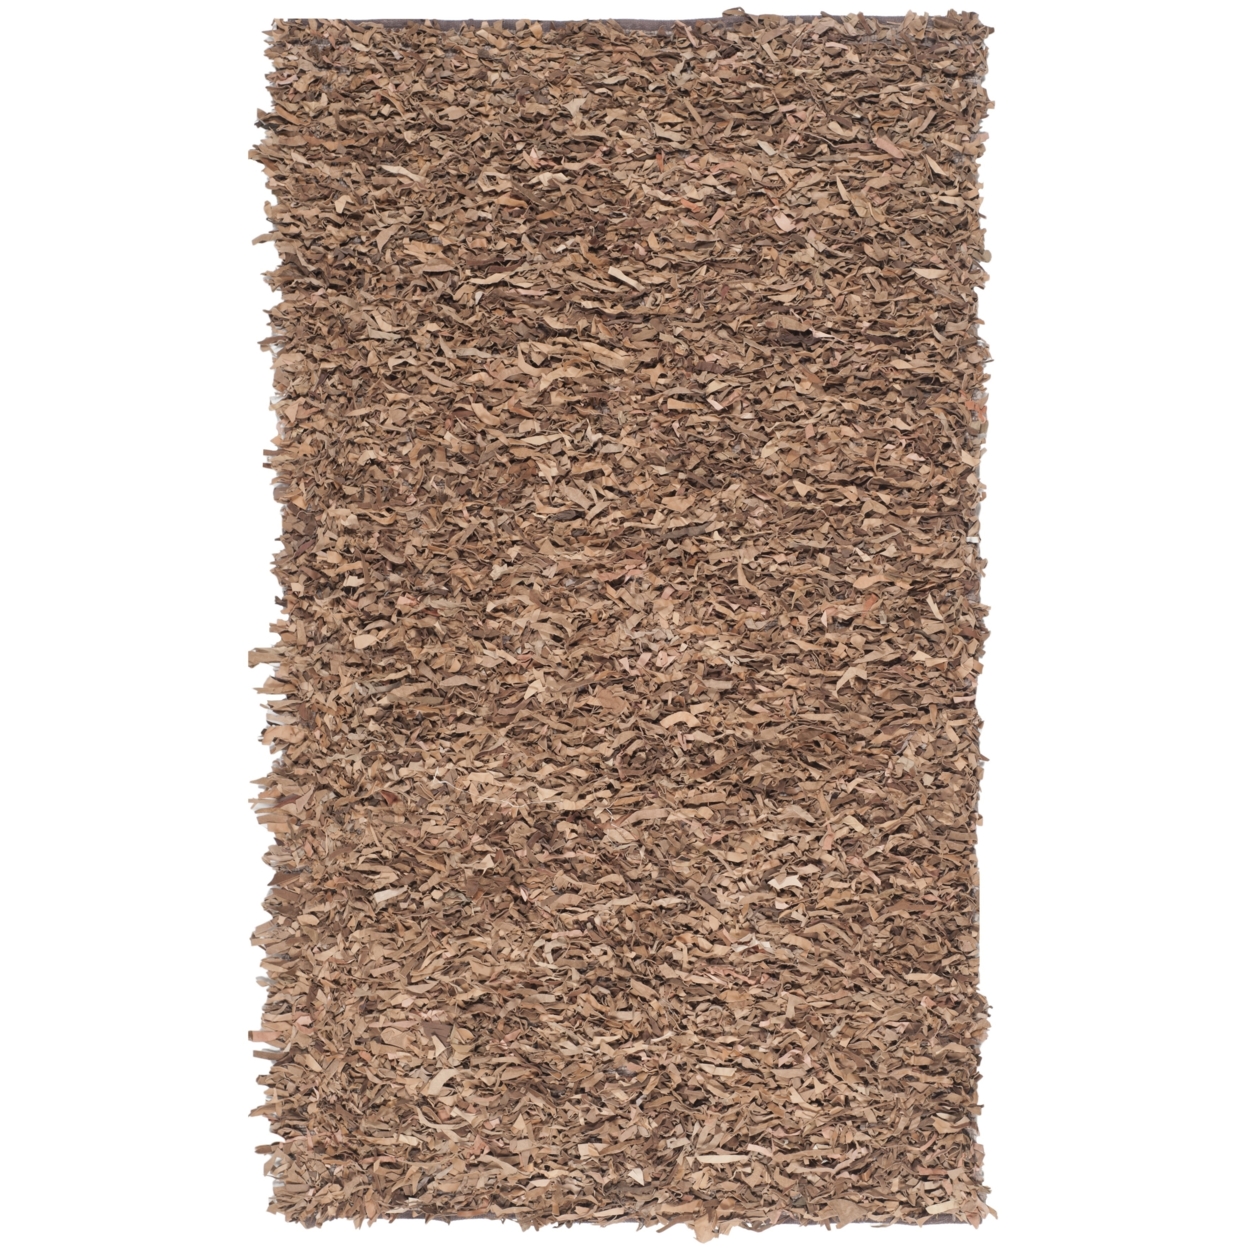 SAFAVIEH Leather Shag LSG511K Hand-knotted Brown Rug - 5' X 8'